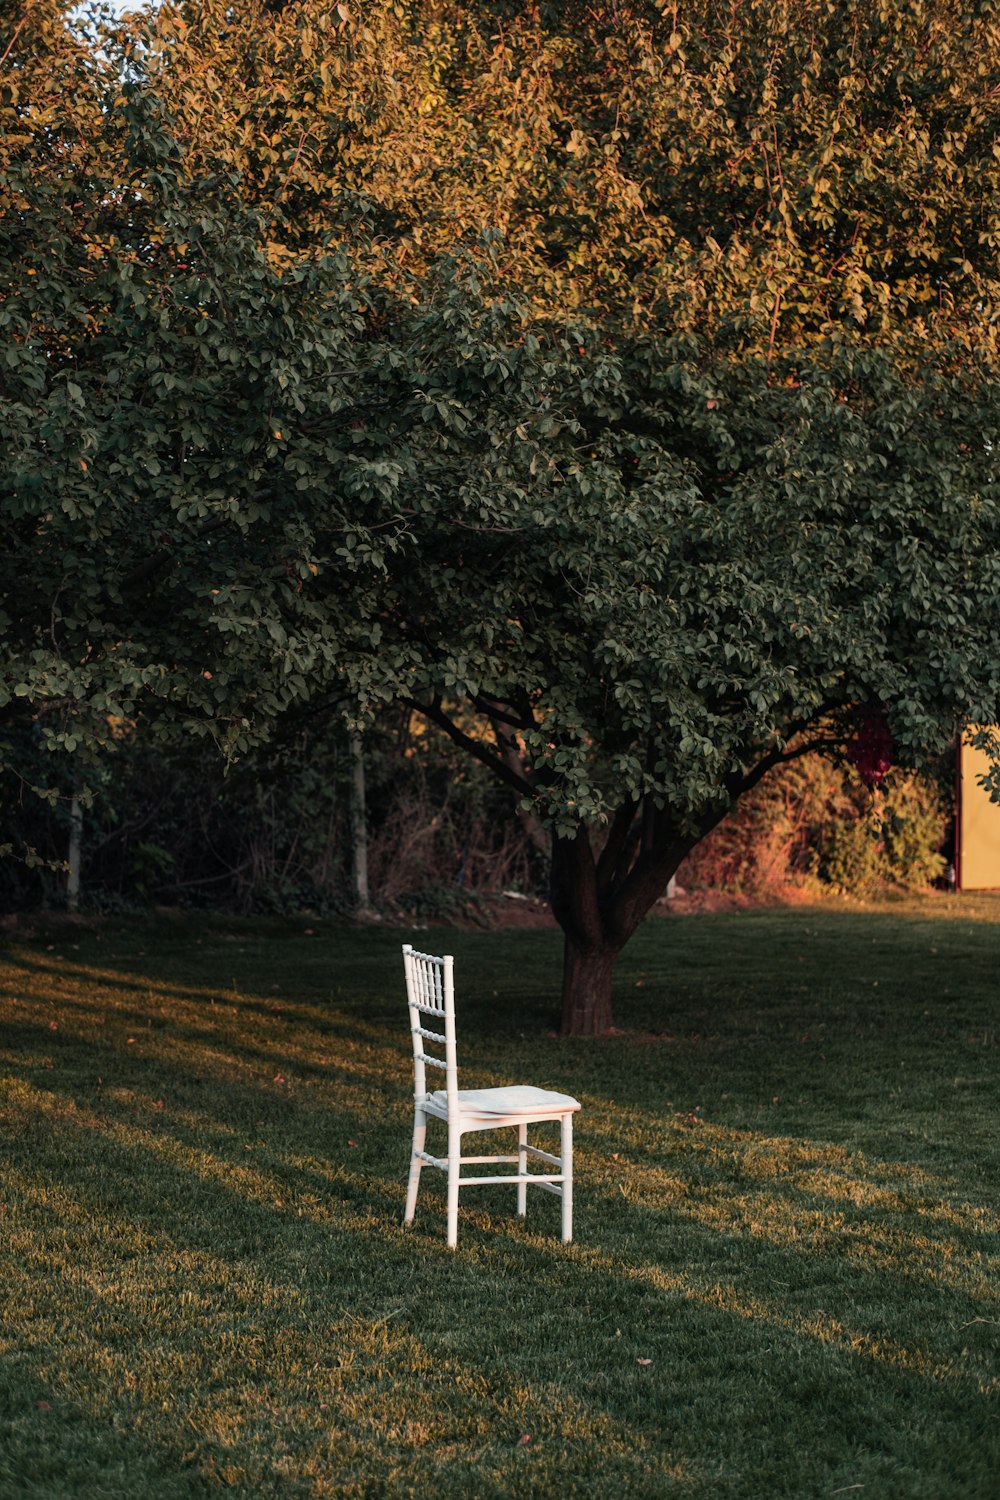 a chair in a grassy area with trees in the back